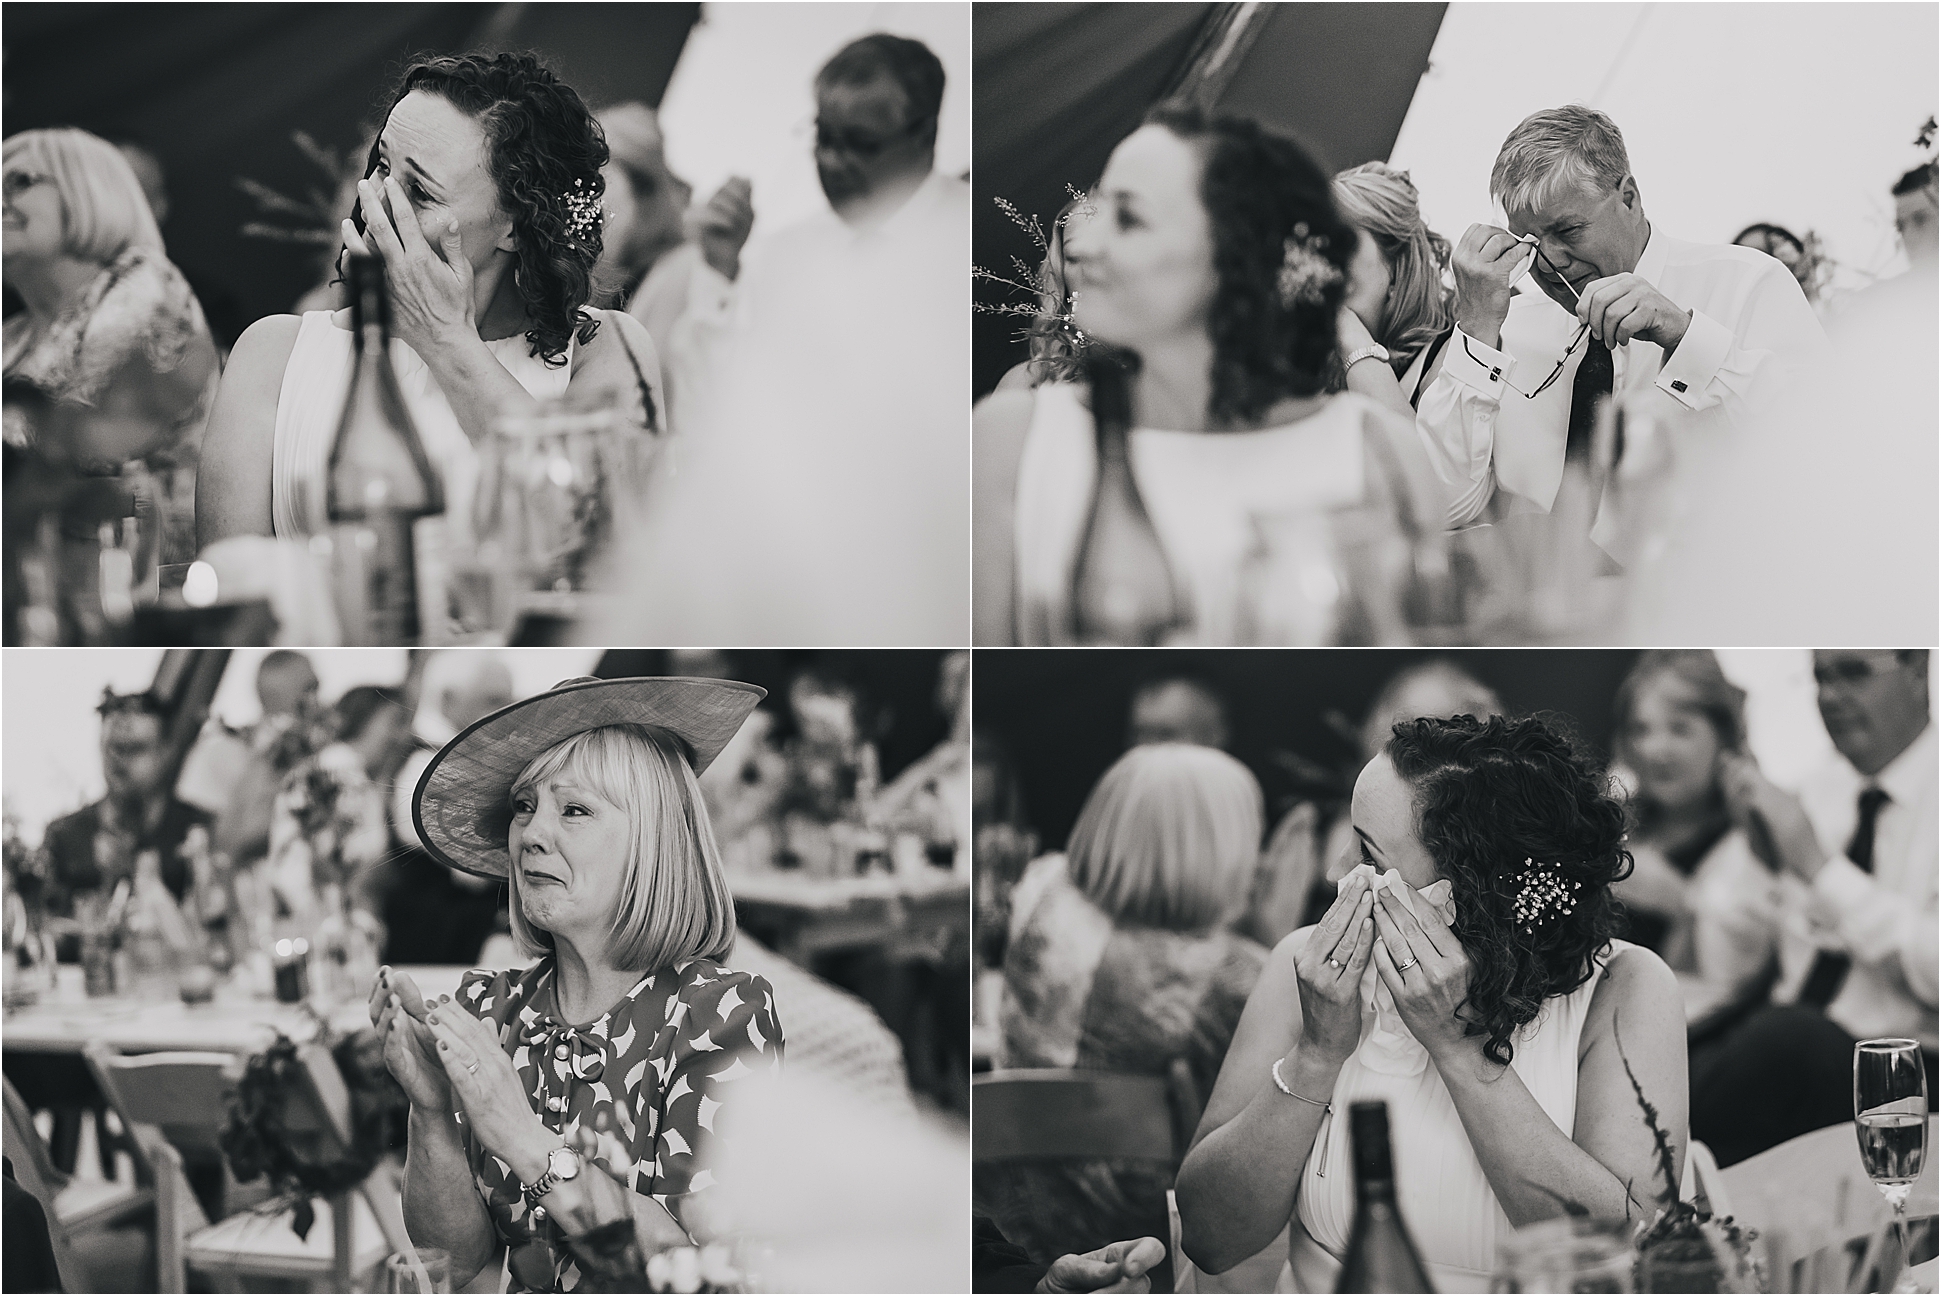 Ben and Ash – Tipi Wedding of awesomeness